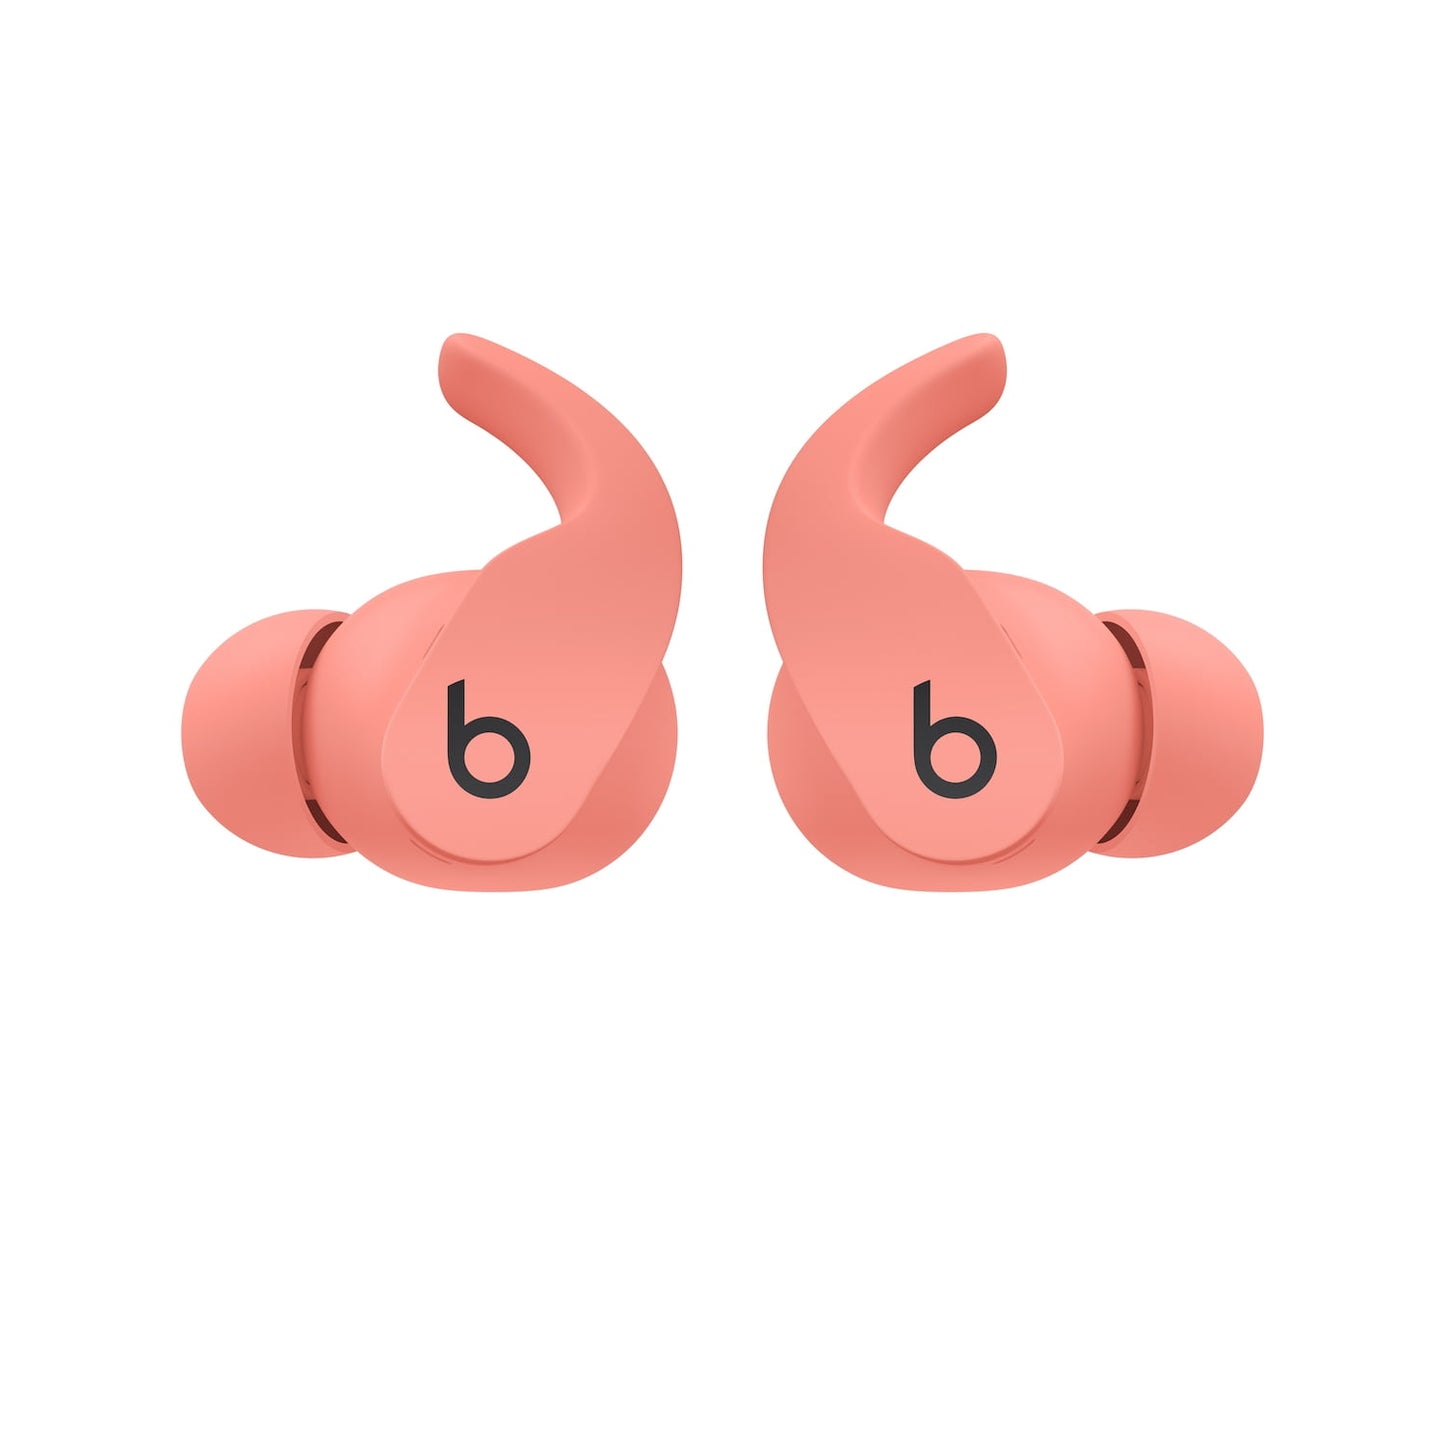 Beats Fit Pro - Noise Cancelling Wireless Earbuds - Apple & Android Compatible - Beats Black